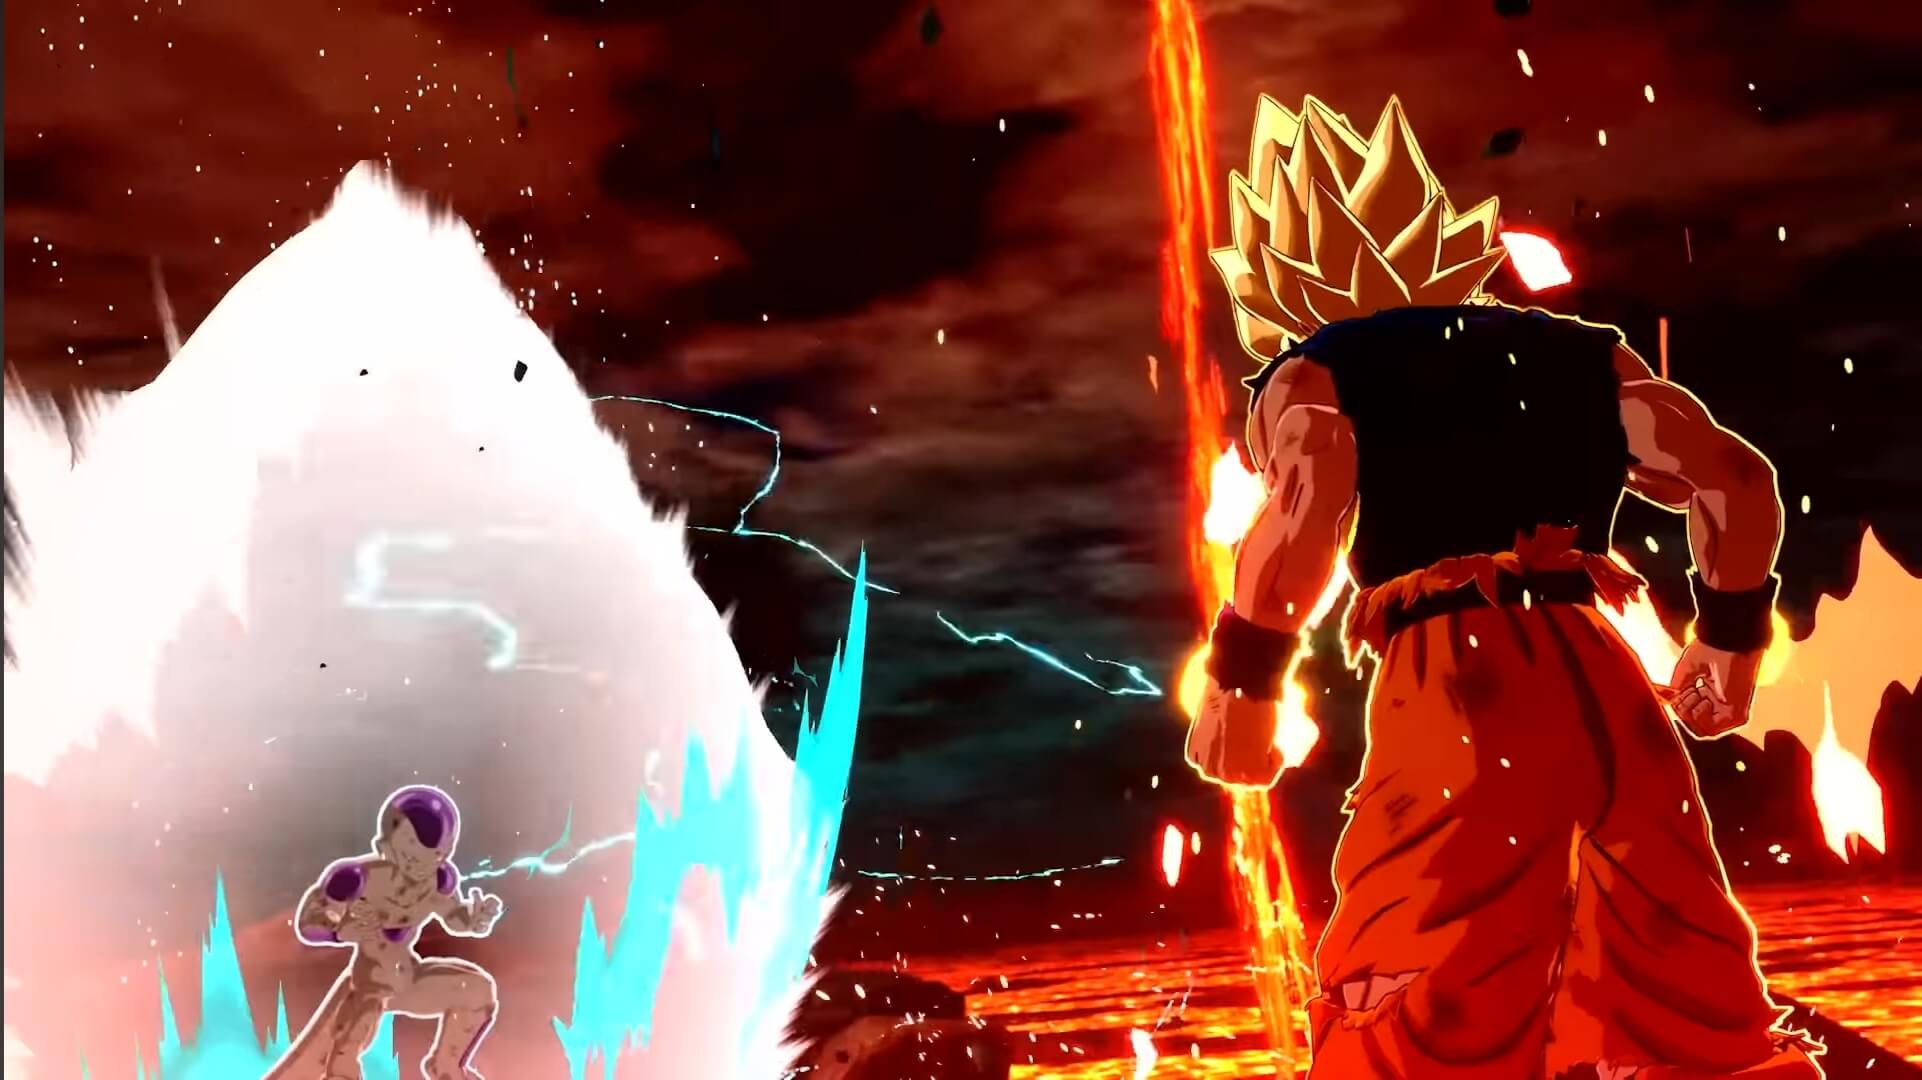 I will never get tired of this story | Source: Bandai Namco (YouTube)